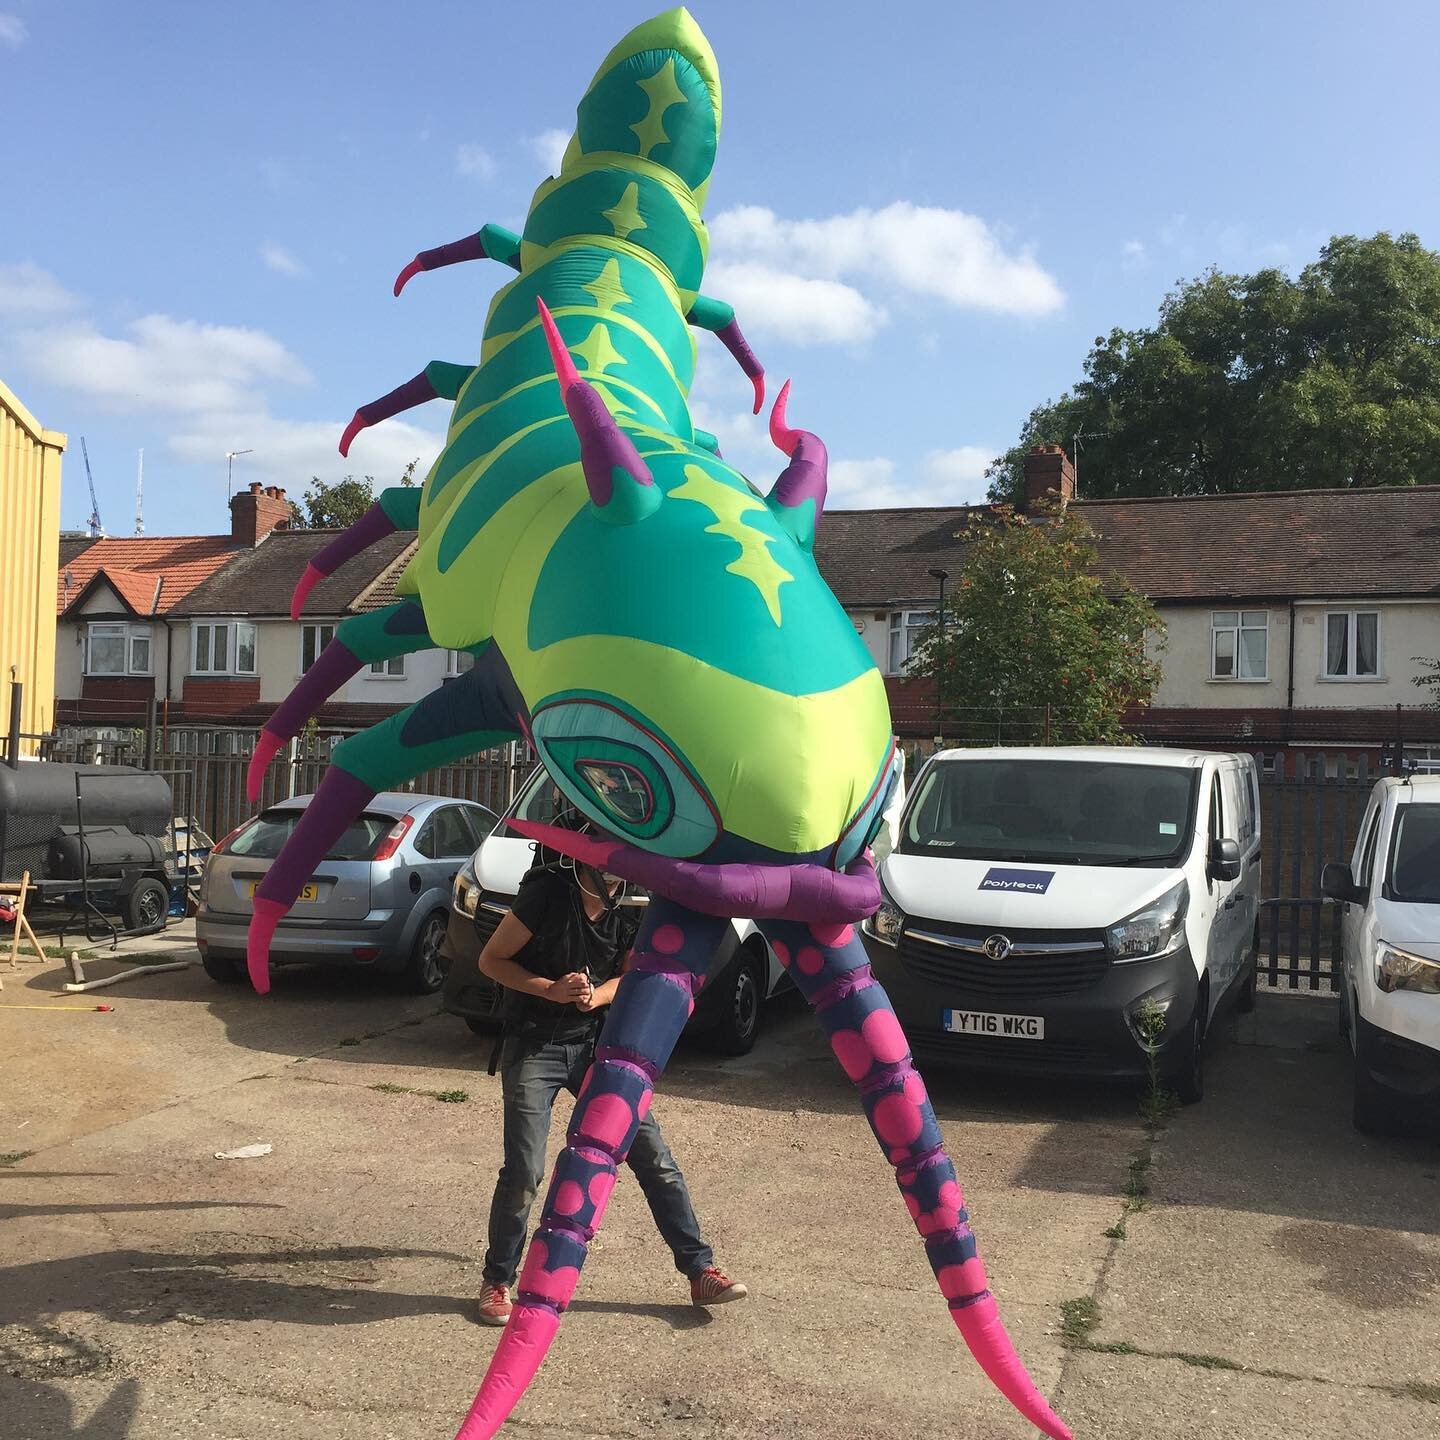 First trial today with the tail lift mech installed. #inflatablepuppet #giantpuppet #inflatable #walkabout #isopod #deepsea #underwaterbeast #giantshrimp #bathynemus